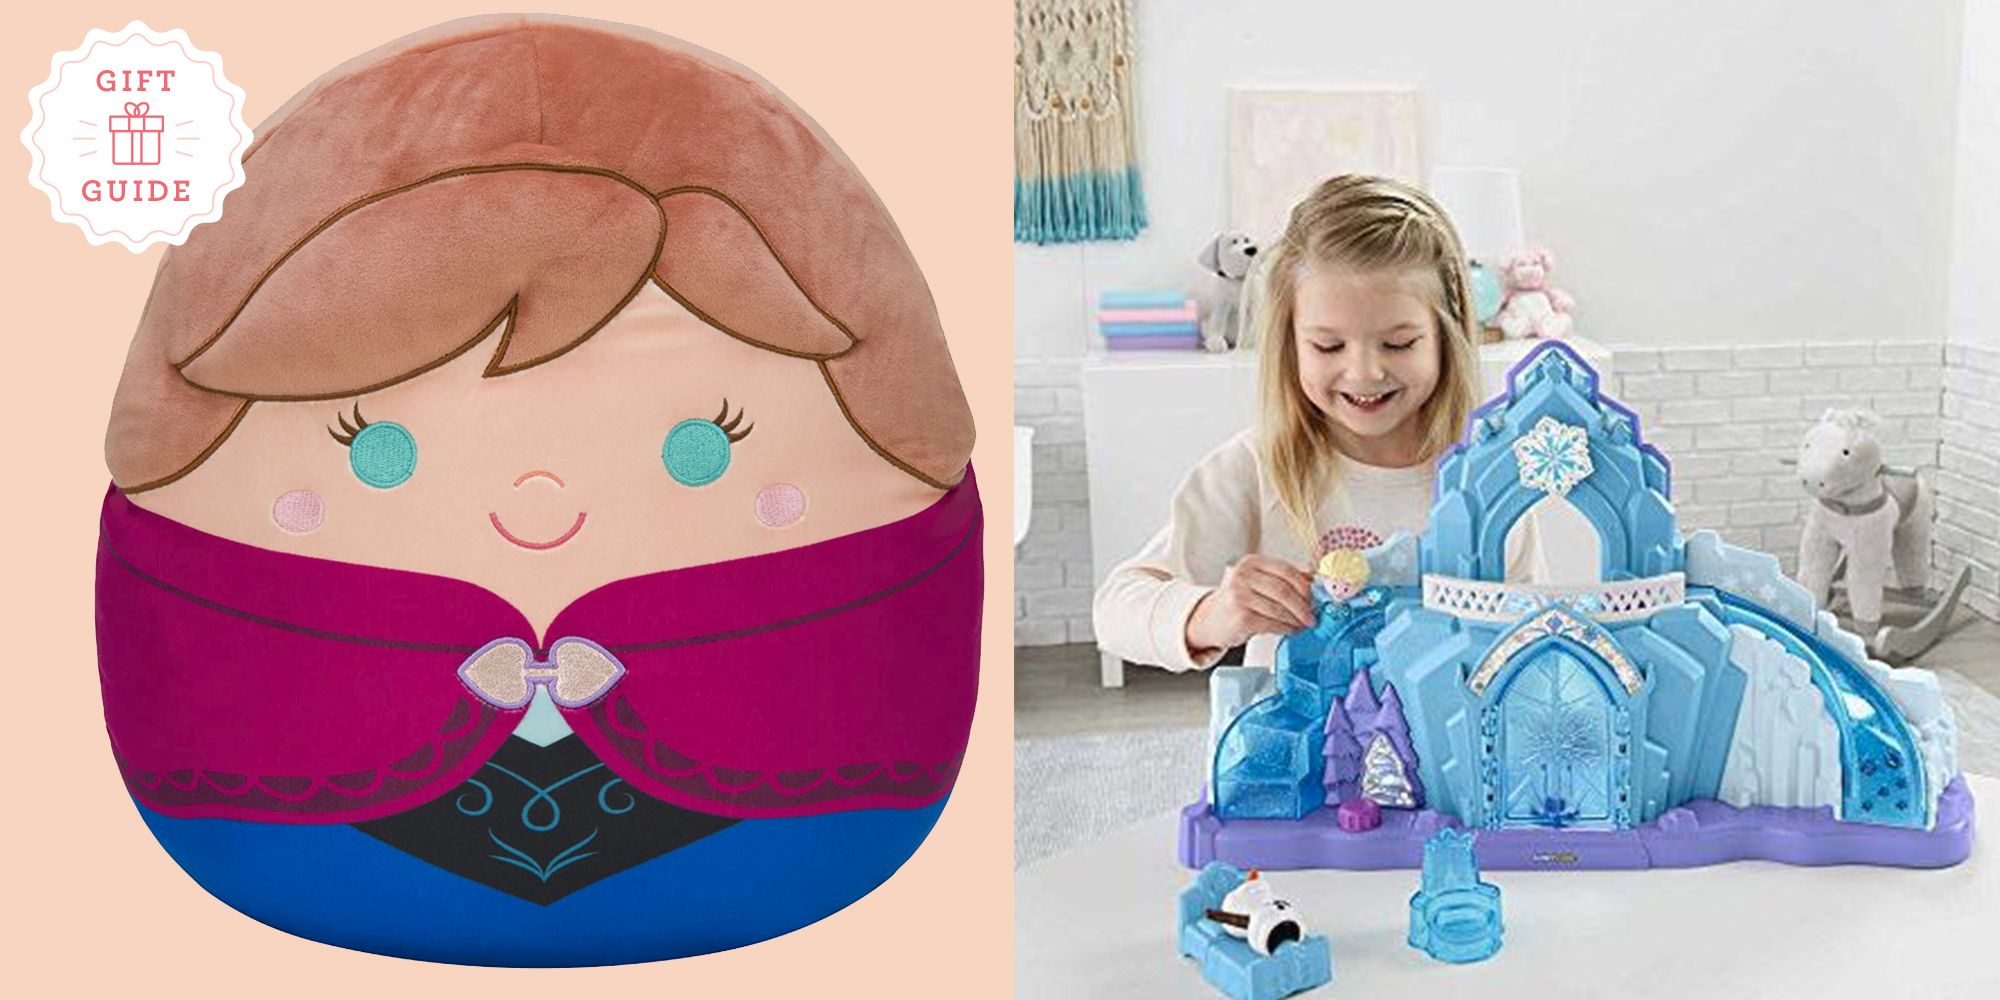 Buy Frozen Birthday Frozen Gift Princess Gifts for Little Girls Online in  India  Etsy